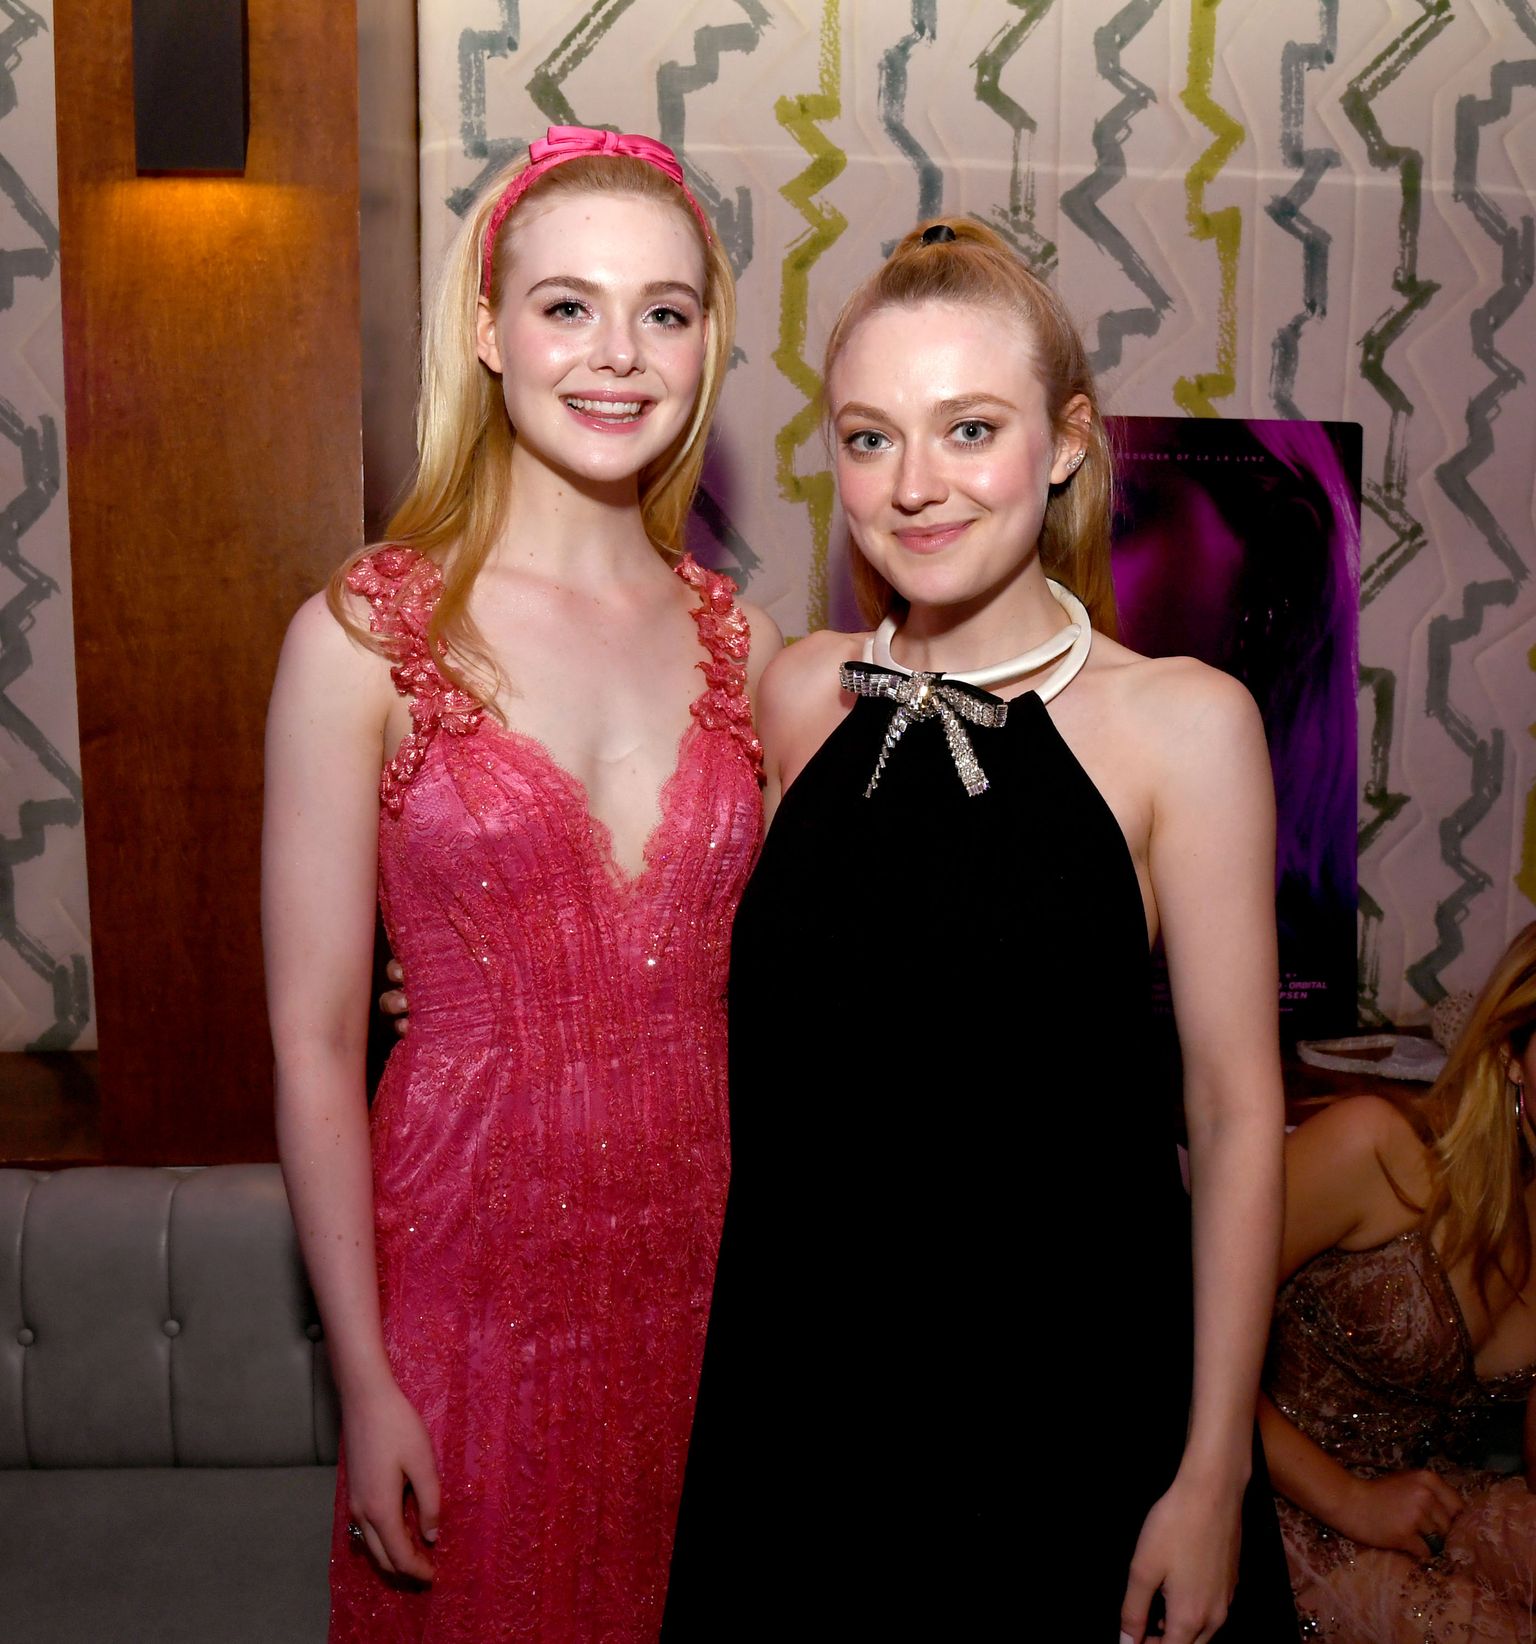 Elle Fanning and Dakota Fanning at the after party for a special screening of "Teen Spirit" in 2019 in Hollywood, California | Source: Getty Images